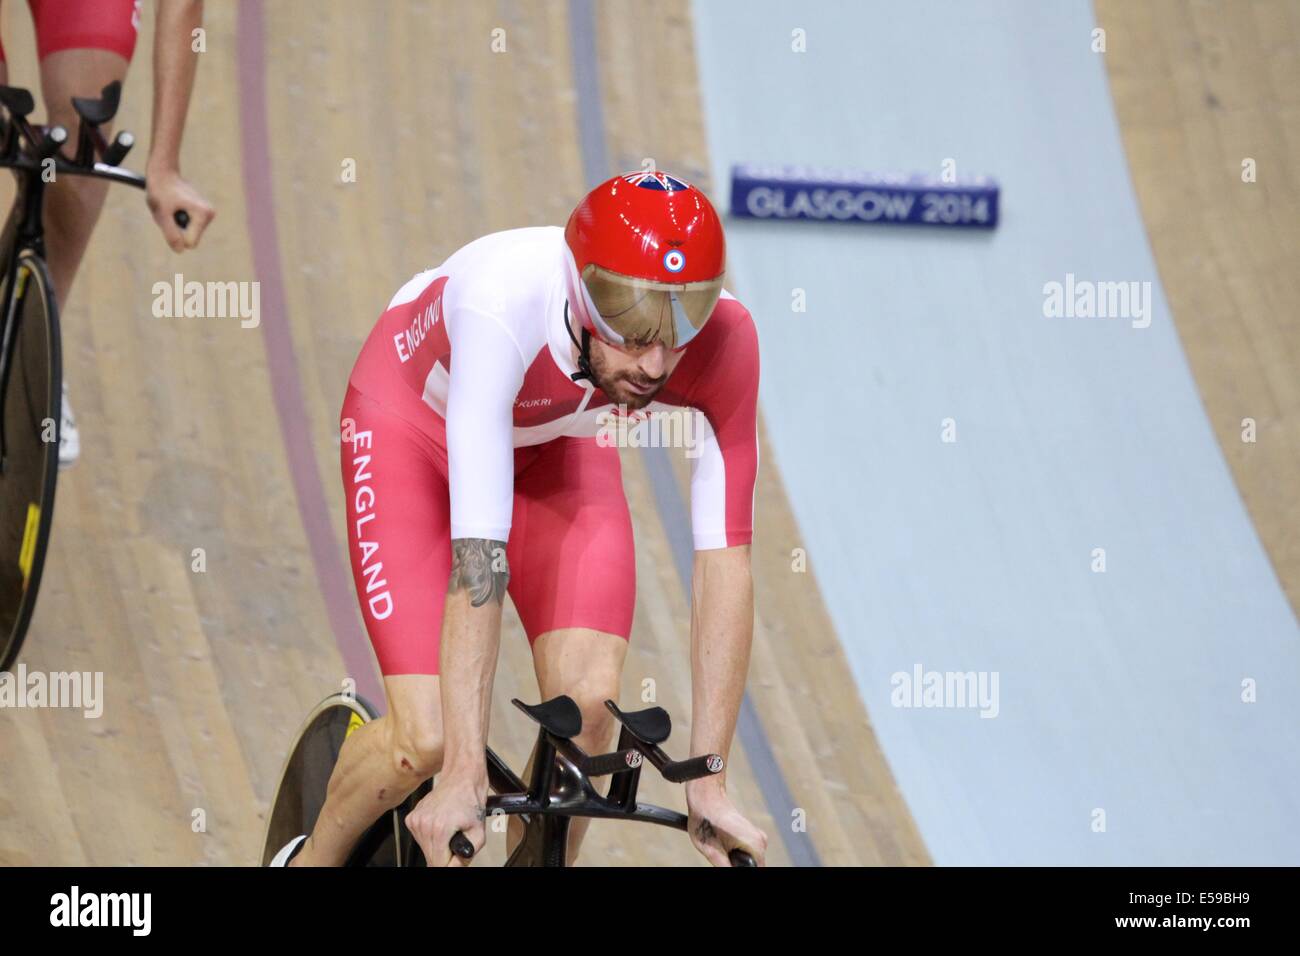 Glasgow, Scotland, UK. 24th July 2014. Commonwealth Games day 1, Track Cycling. The England men's team pursuit riders set the second fastest time in qualifying. Bradley Wiggins, pictured, rode in the event. They meet Australia tonight. Credit:  Neville Styles/Alamy Live News Stock Photo